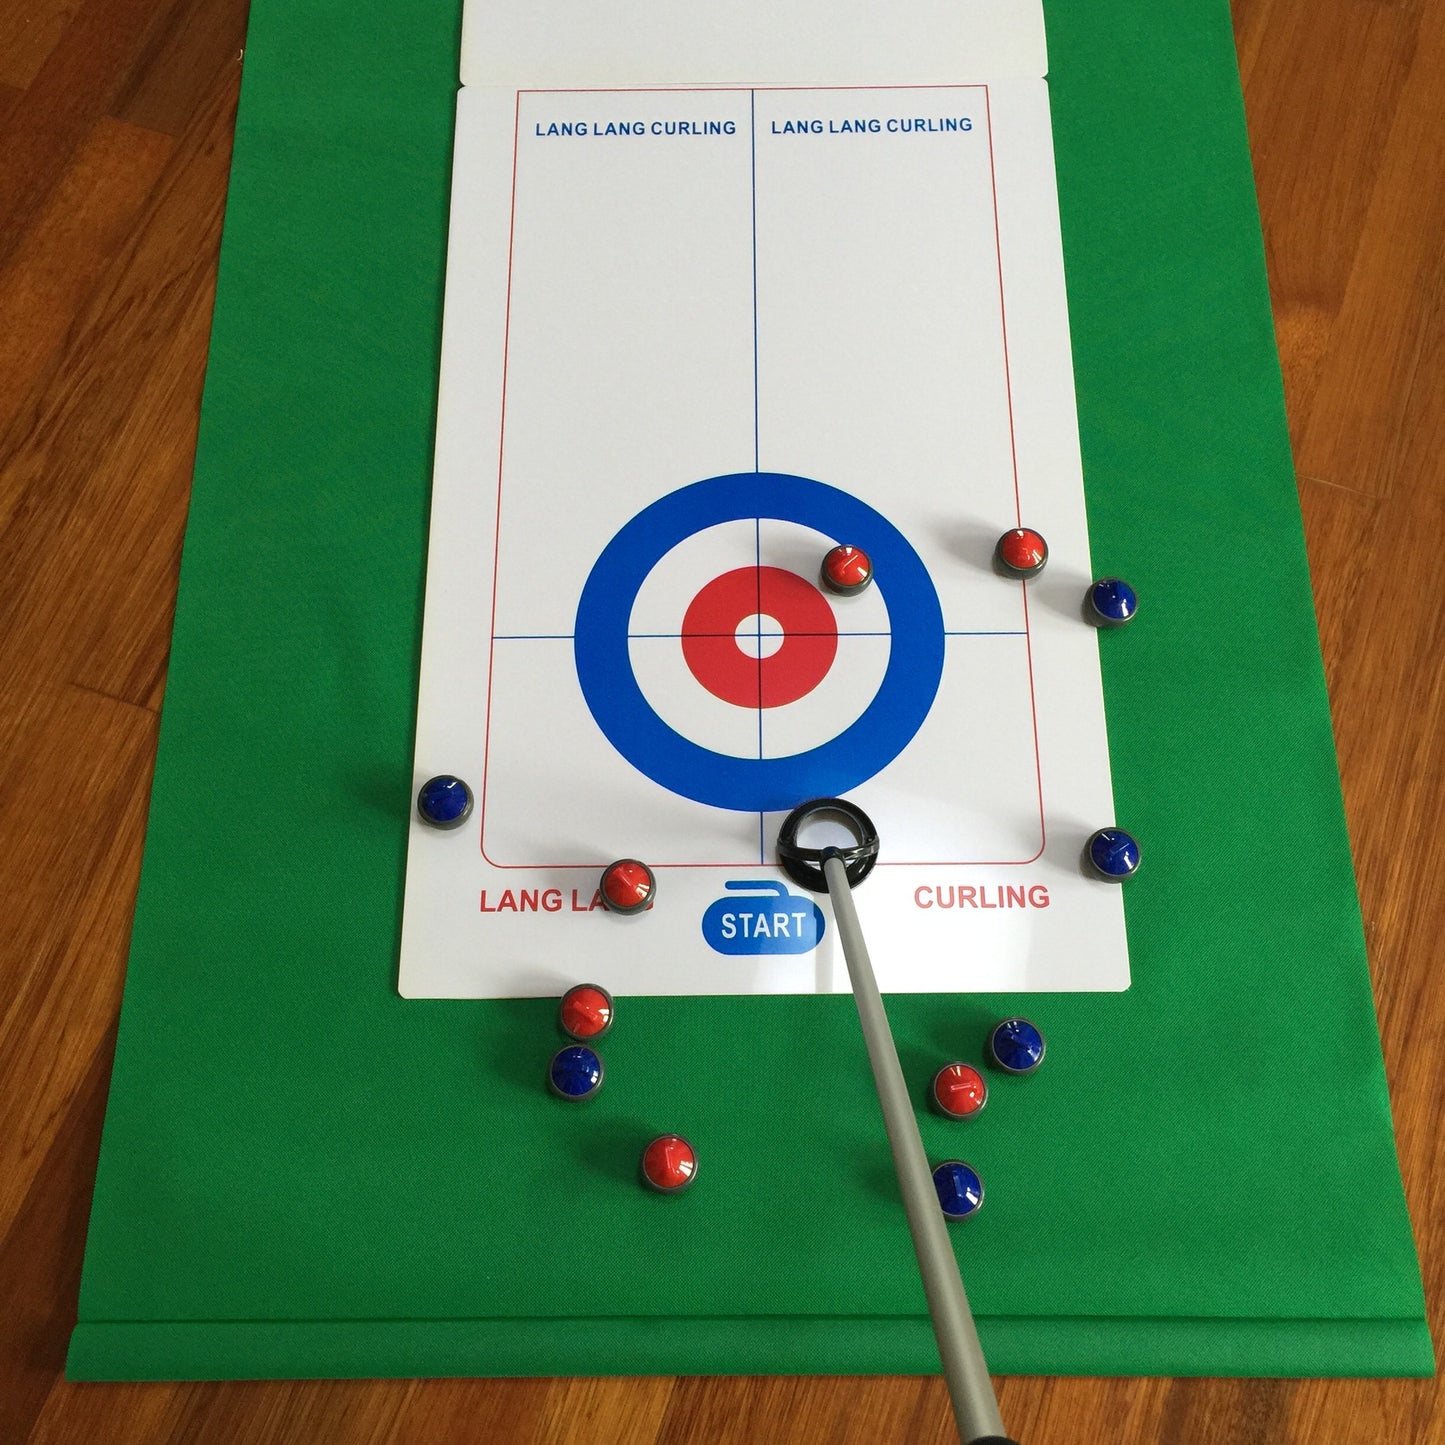 Floor push simulated curling/floor curling ball - equipped with push rod and three-piece splicing of the playing field 2.6 meters